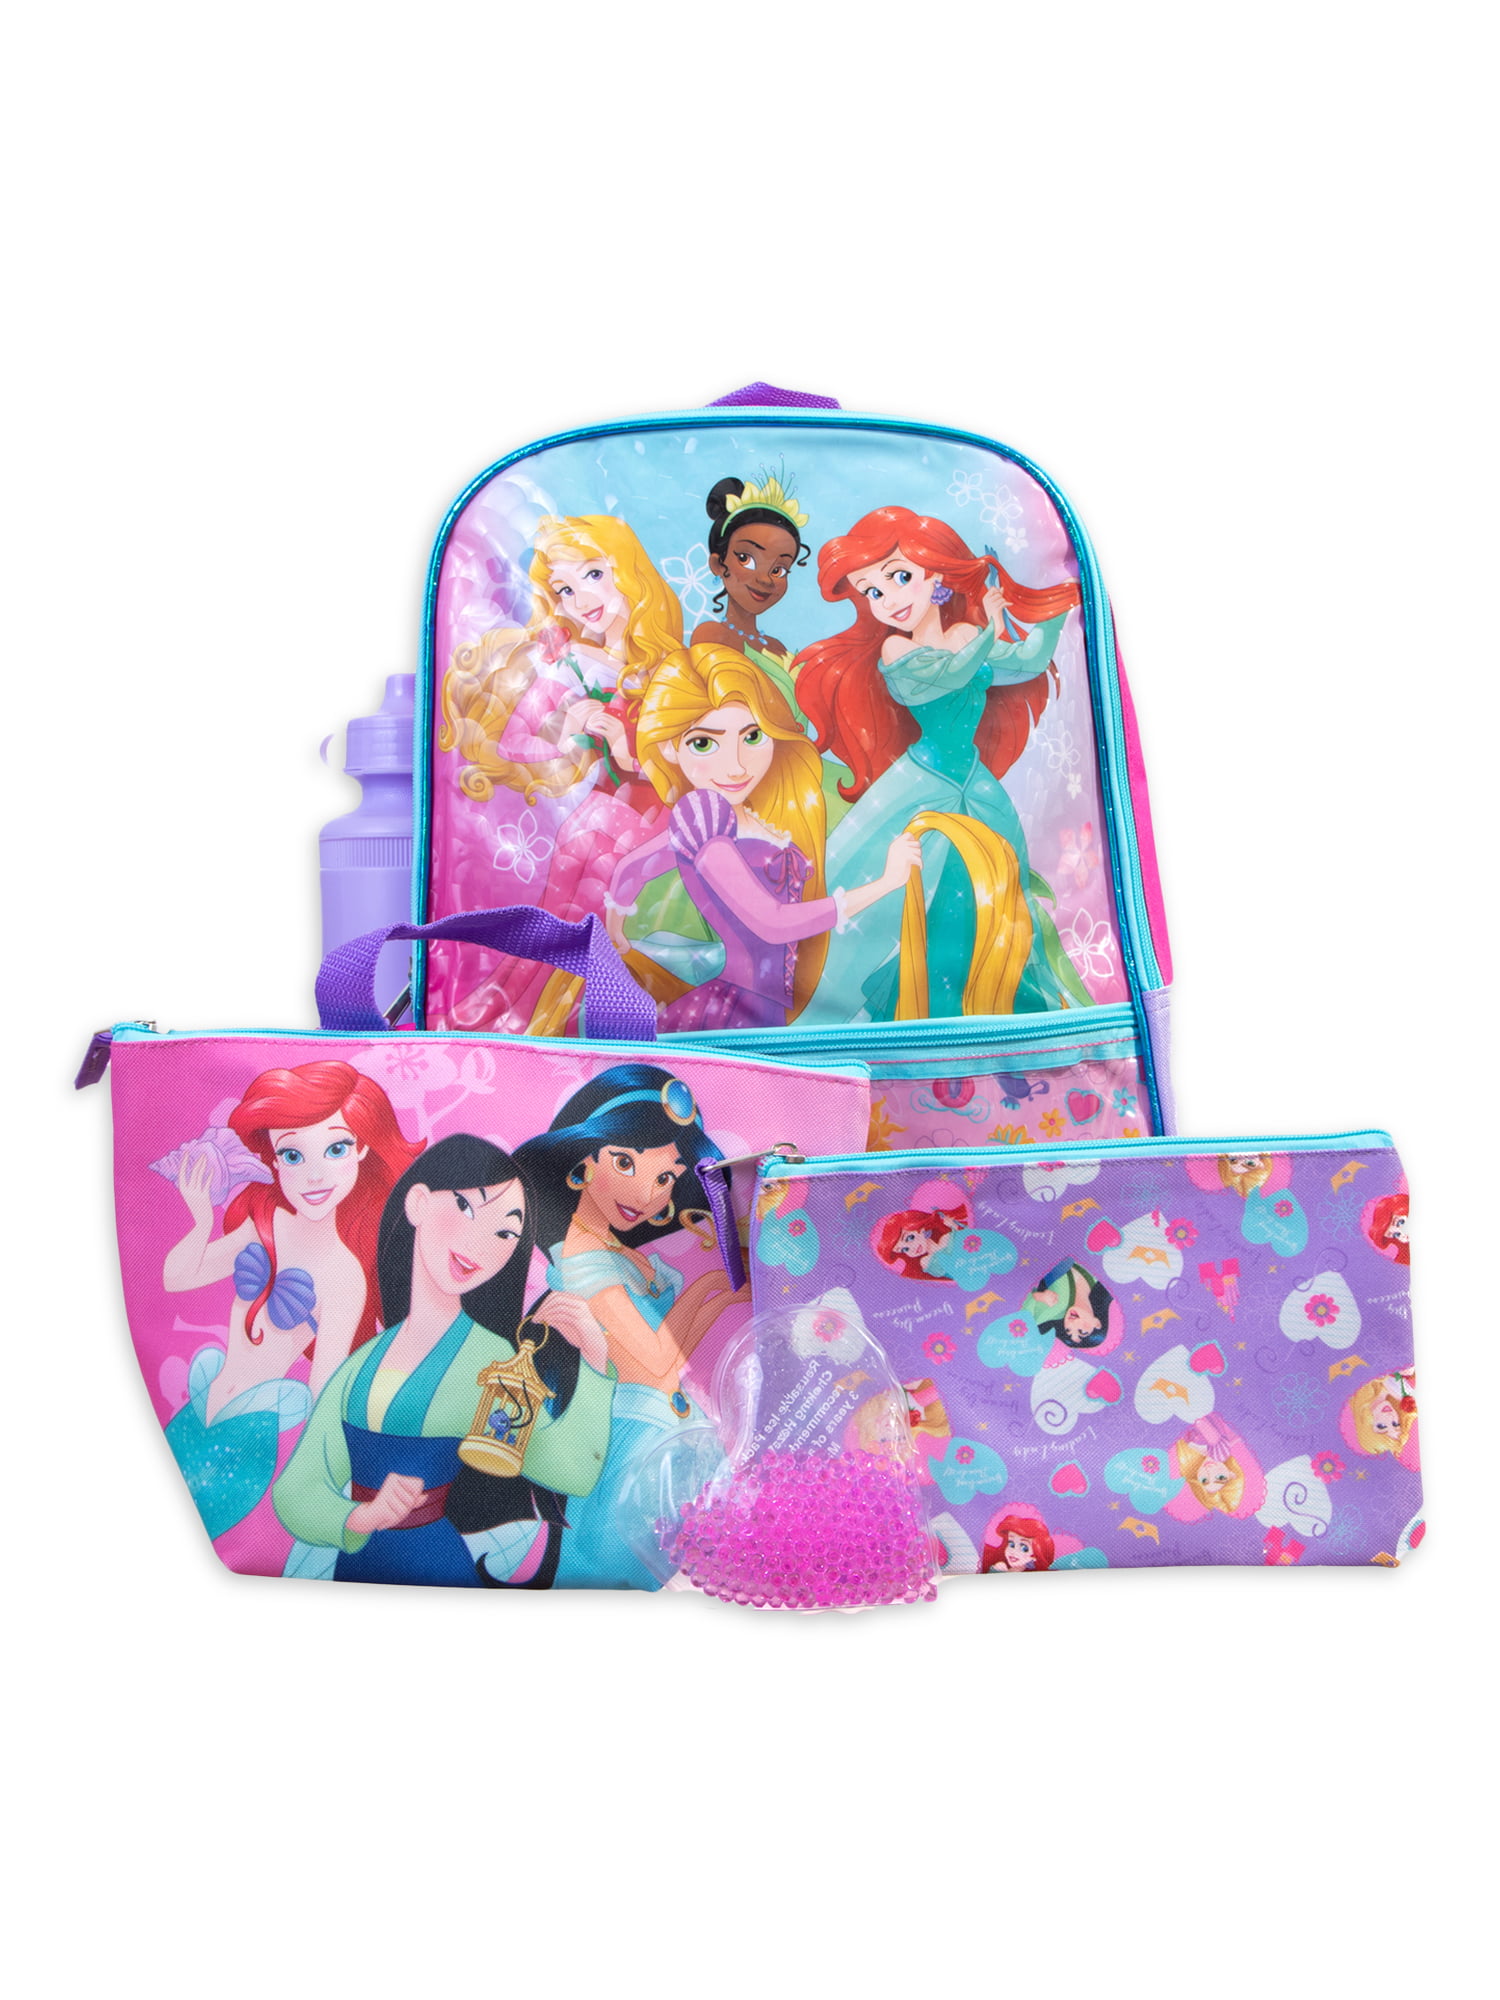 Disney Princess Backpack with Lunch Box for Girls Kids - 16 Princess  Backpack, Disney Princess Lunch Box, Water Pouch, Stickers, More | Disney